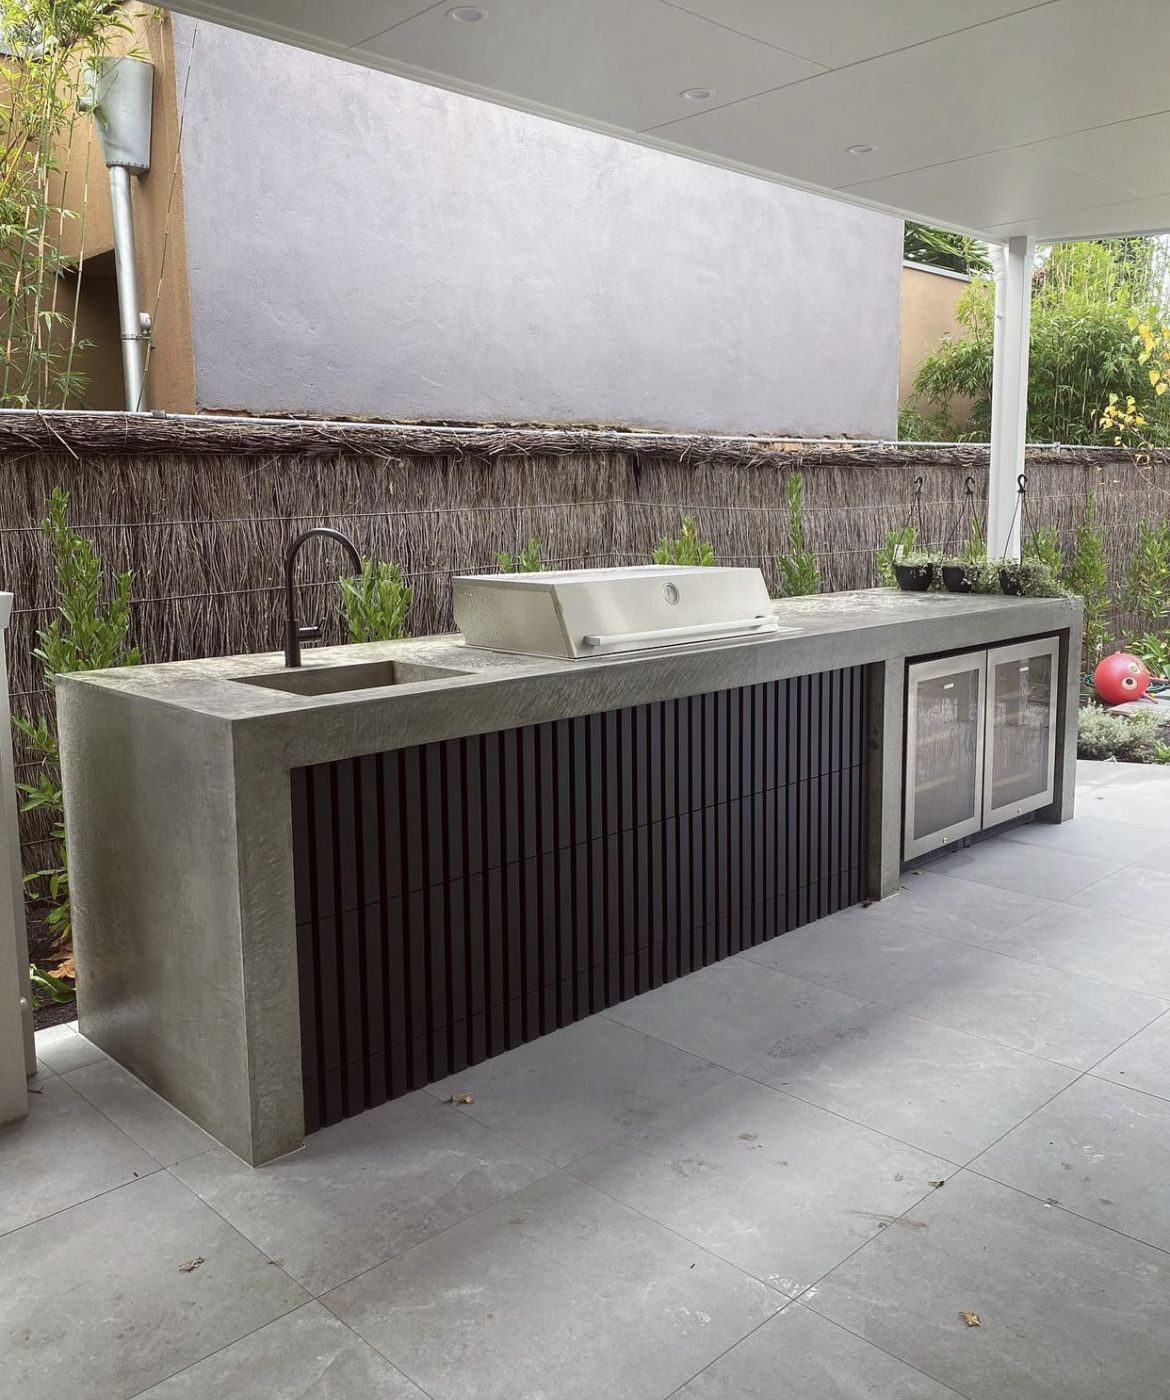 Elevate Your Outdoor Cooking Space with
These Creative Kitchen Ideas